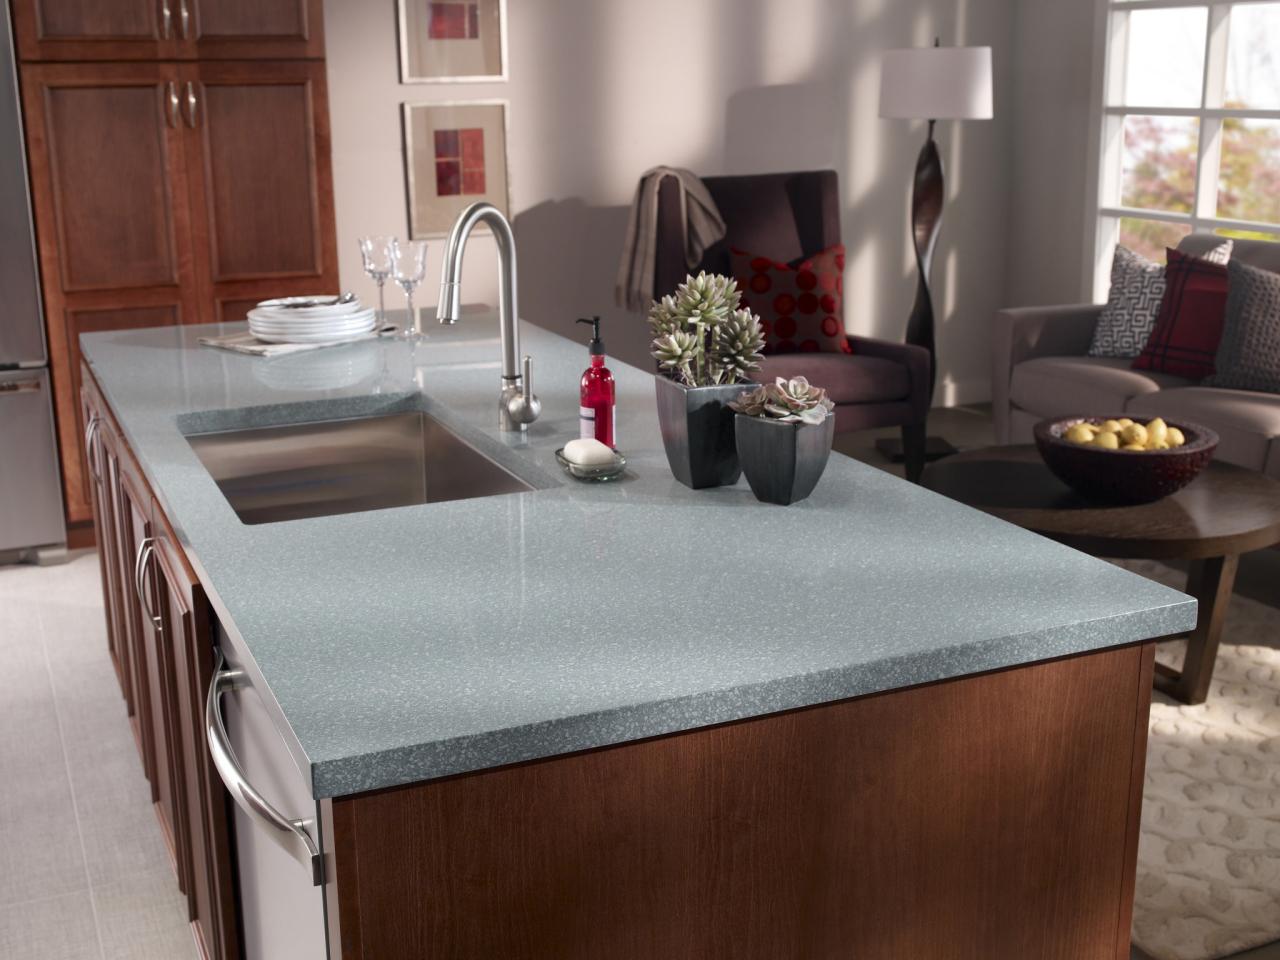 Corian Kitchen Countertops Pictures Ideas Tips From Hgtv Hgtv,How To Make Bread